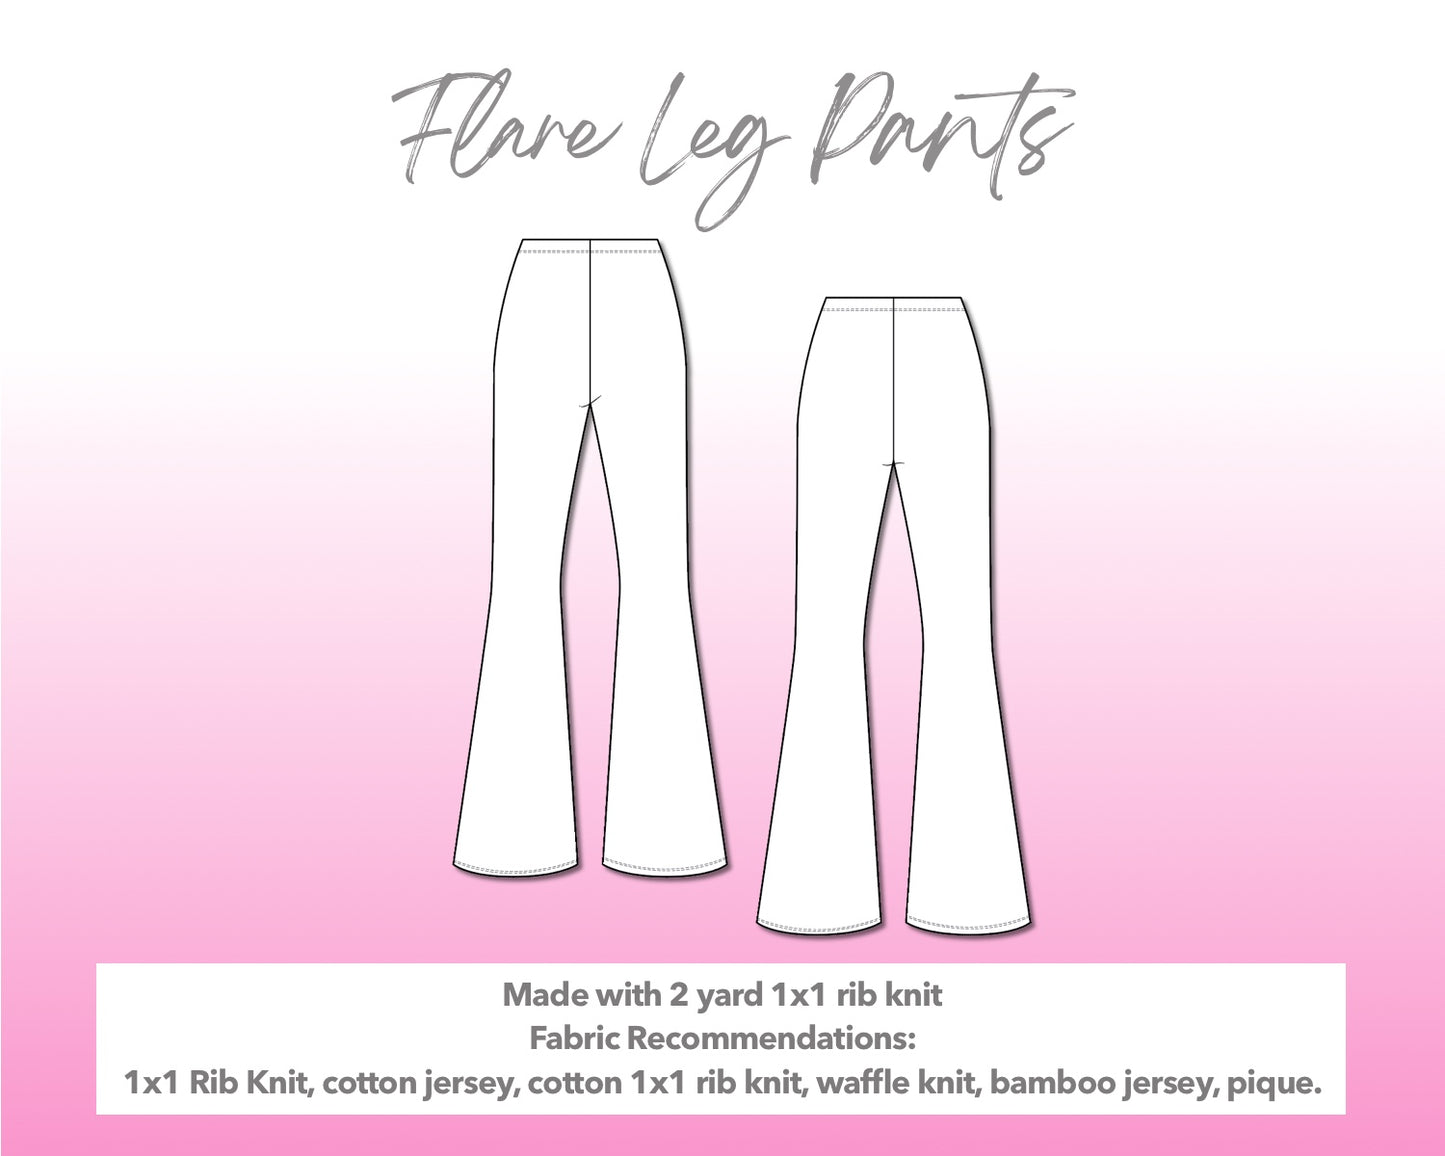 Illustration and detailed description for Flare Leg Knit Pants sewing pattern.